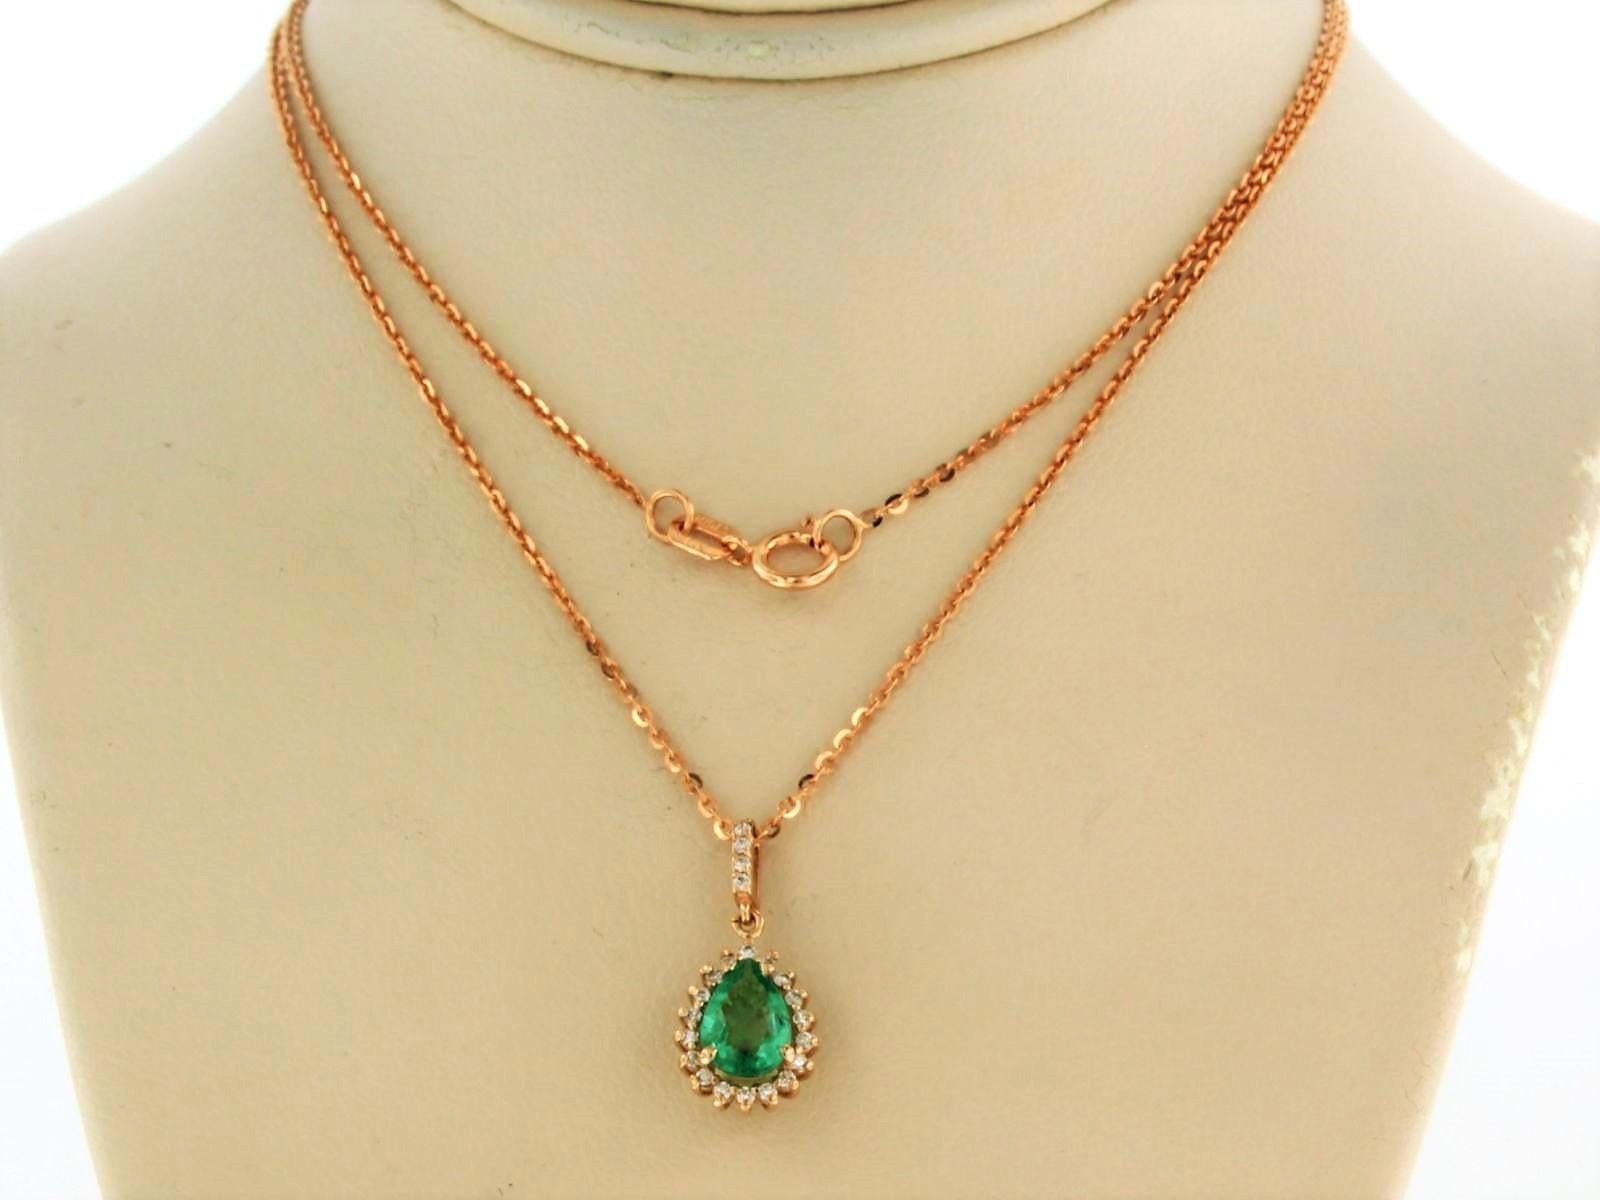 14 kt rose gold necklace with an entourage pendant set with emerald tot. 0.50 ct and brilliant cut diamond up to. 0.09 ct - F/G - VS/SI - 45 cm long

detailed description:

necklace is 45 cm long and 0.7 mm wide

size of the pendant is approximately